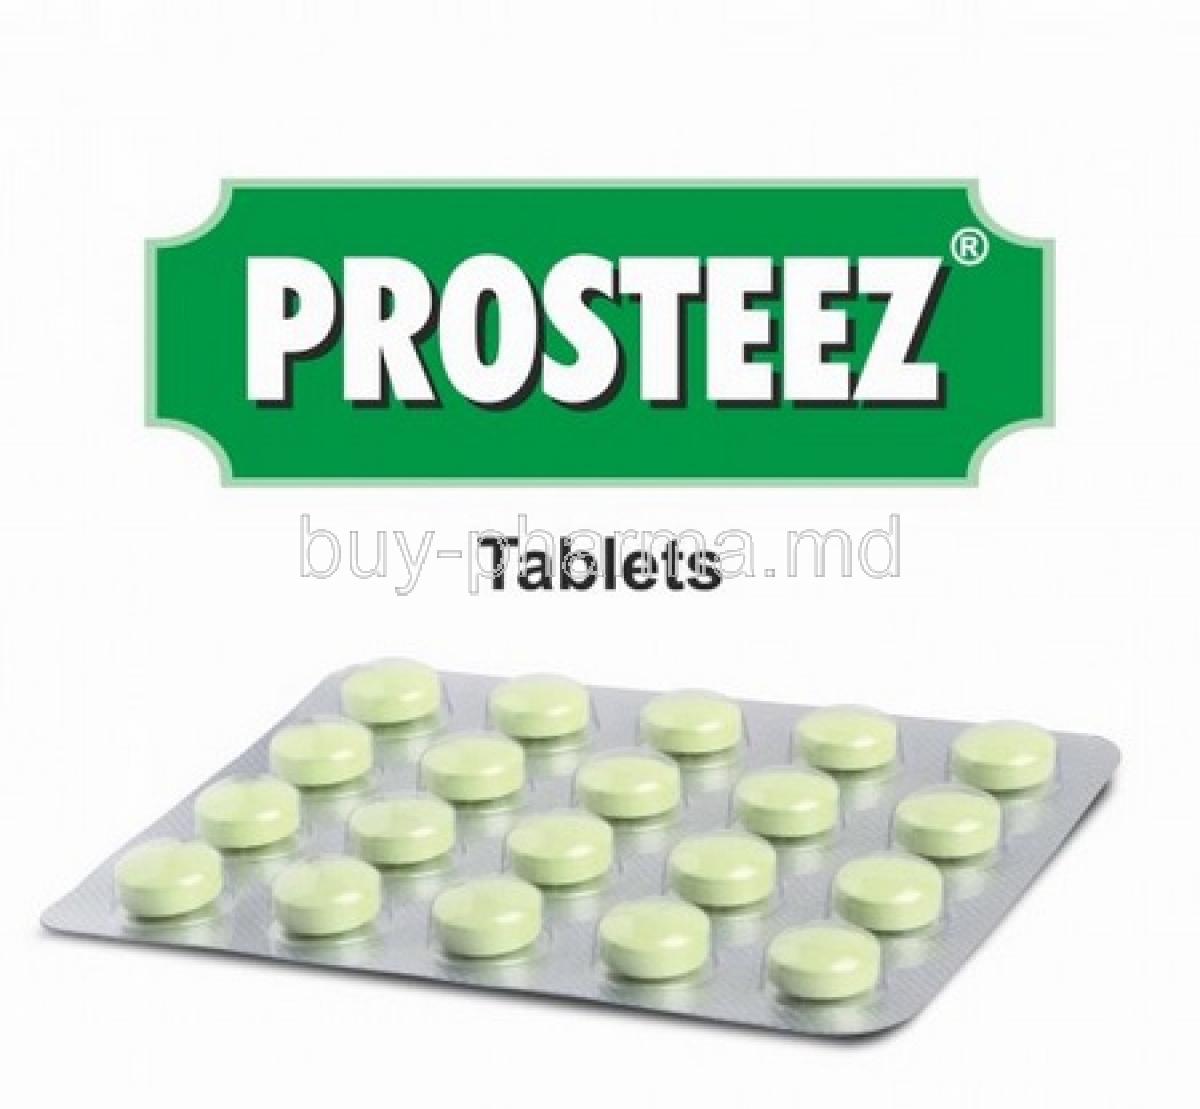 Prosteez box and tablets